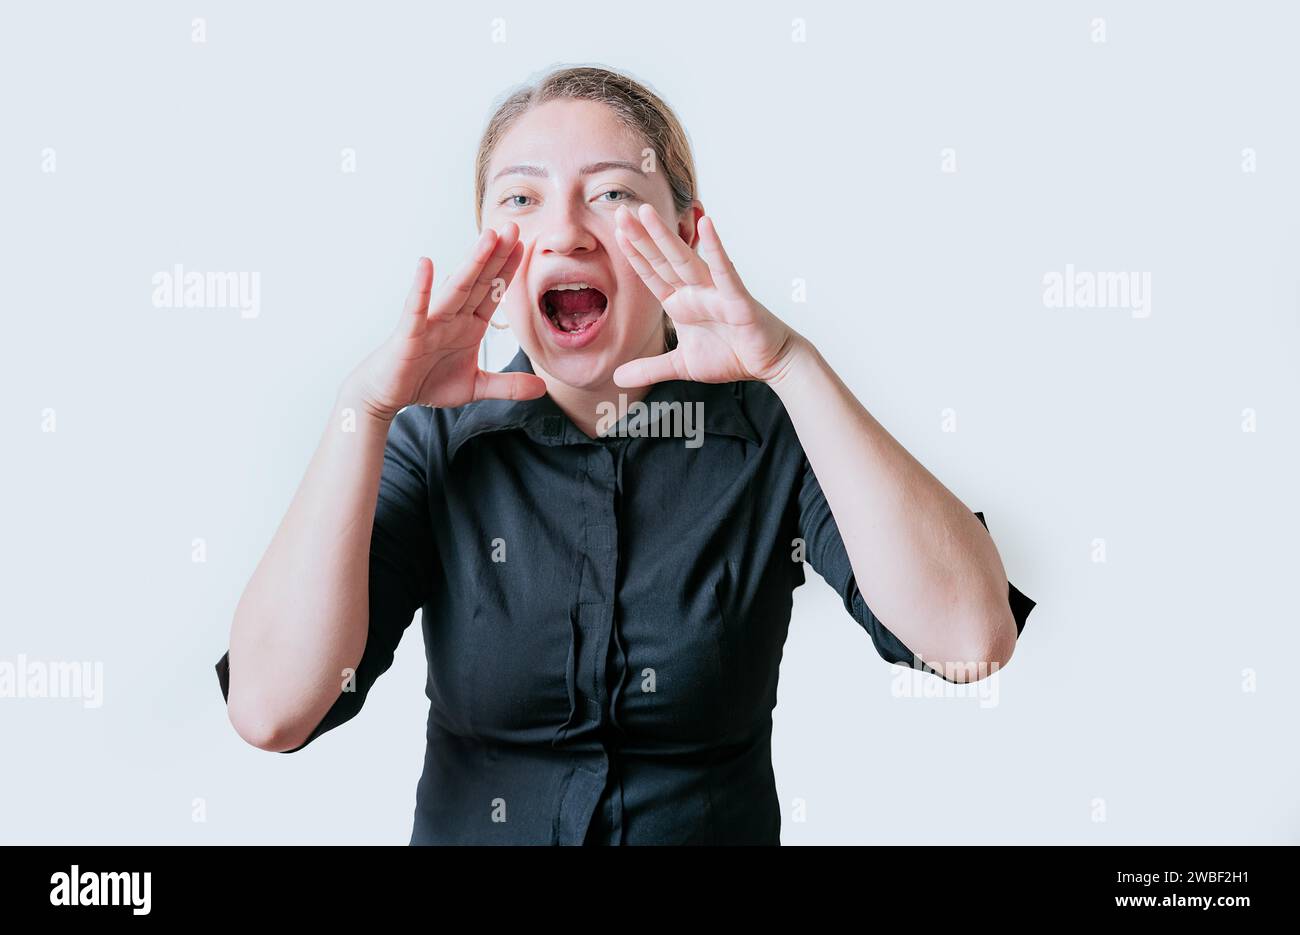 Female teenager announcing something to the camera. Young girl screaming and announcing at the camera Stock Photo